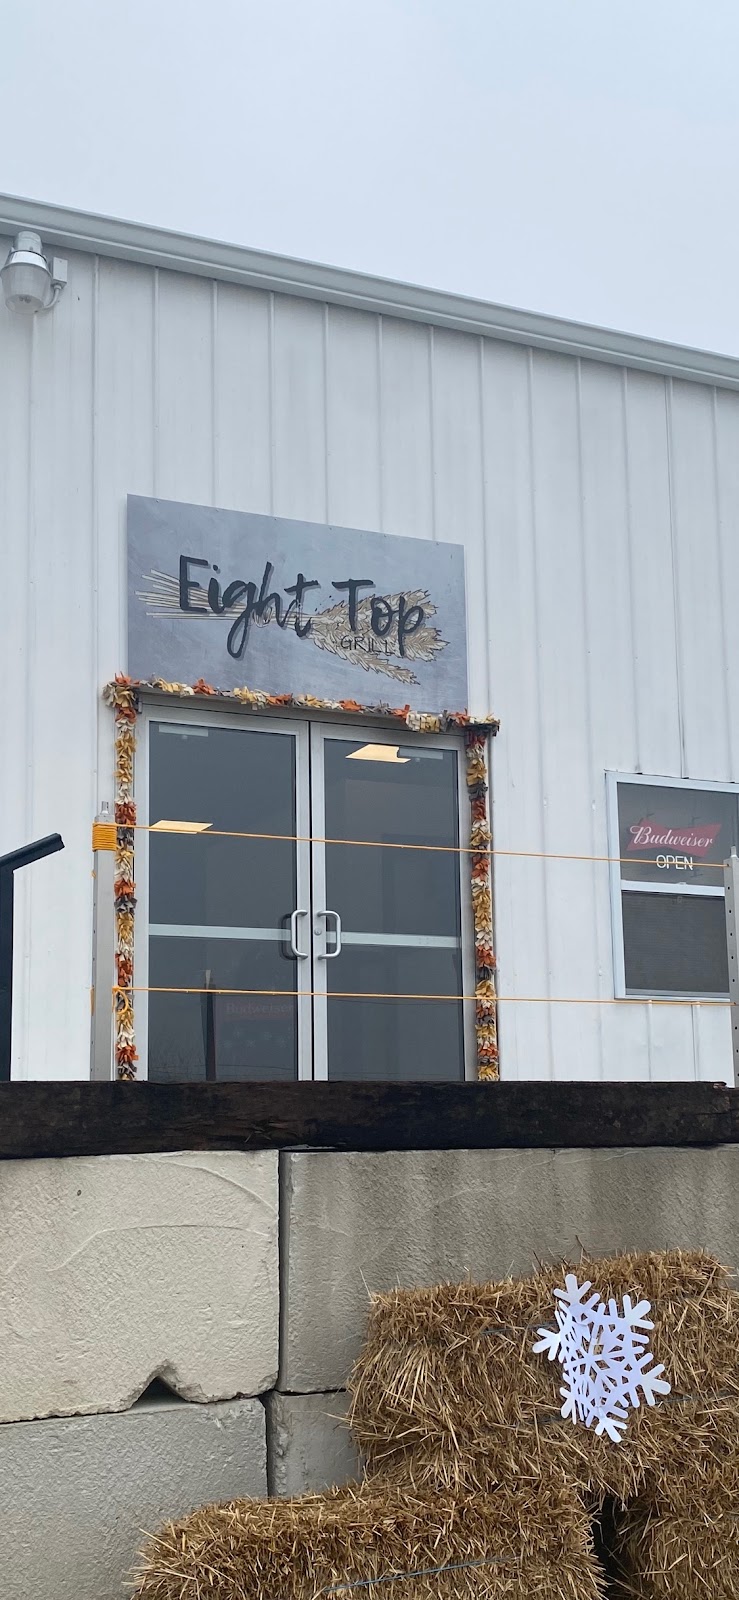 Eight Top Grill | 7211 Hyland Rd, Guilford, IN 47022, USA | Phone: (812) 576-5000